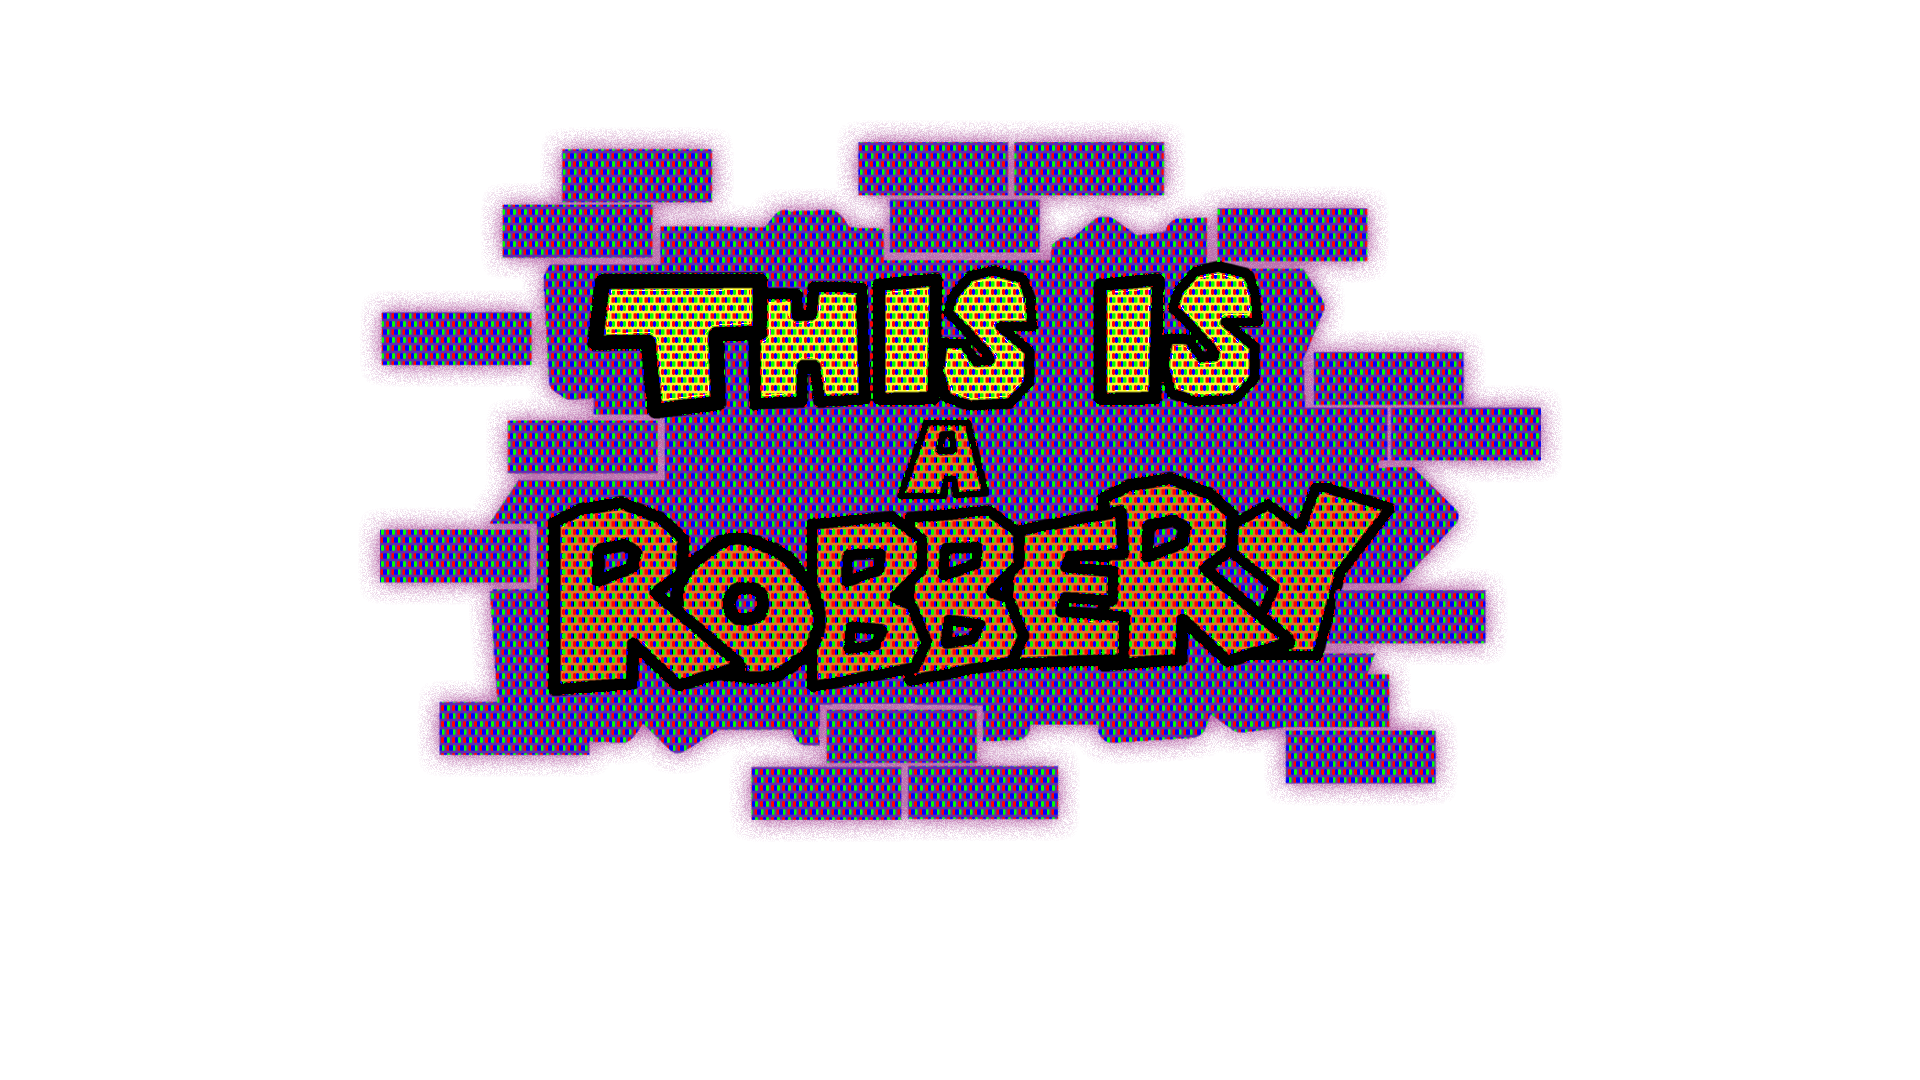 THIS IS A ROBBERY